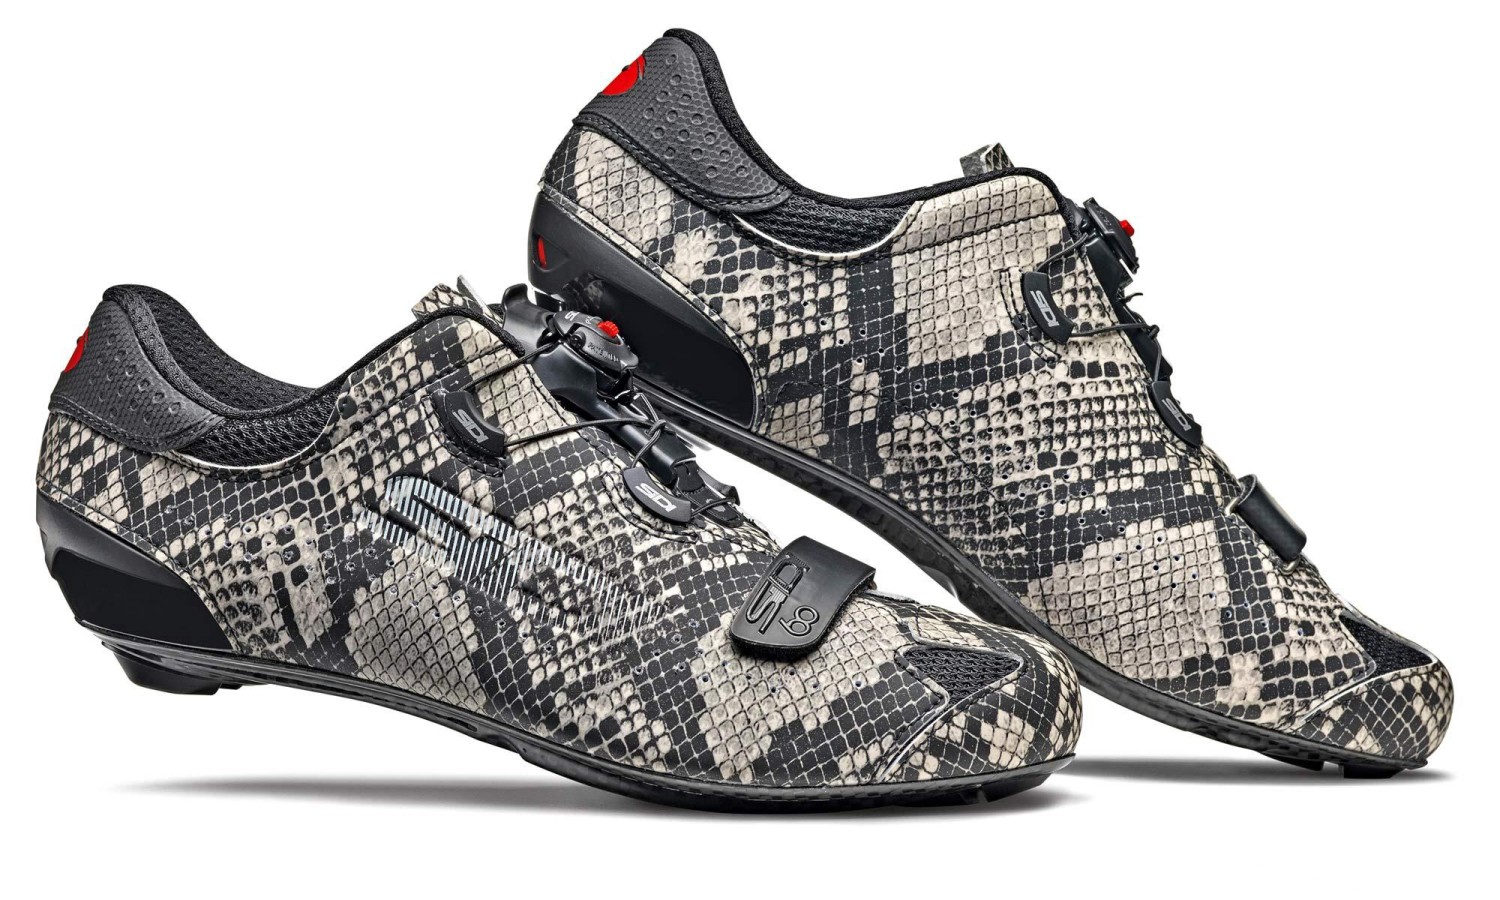 Tretry sil Sidi Sixty Snake Limited - 44 snake leather